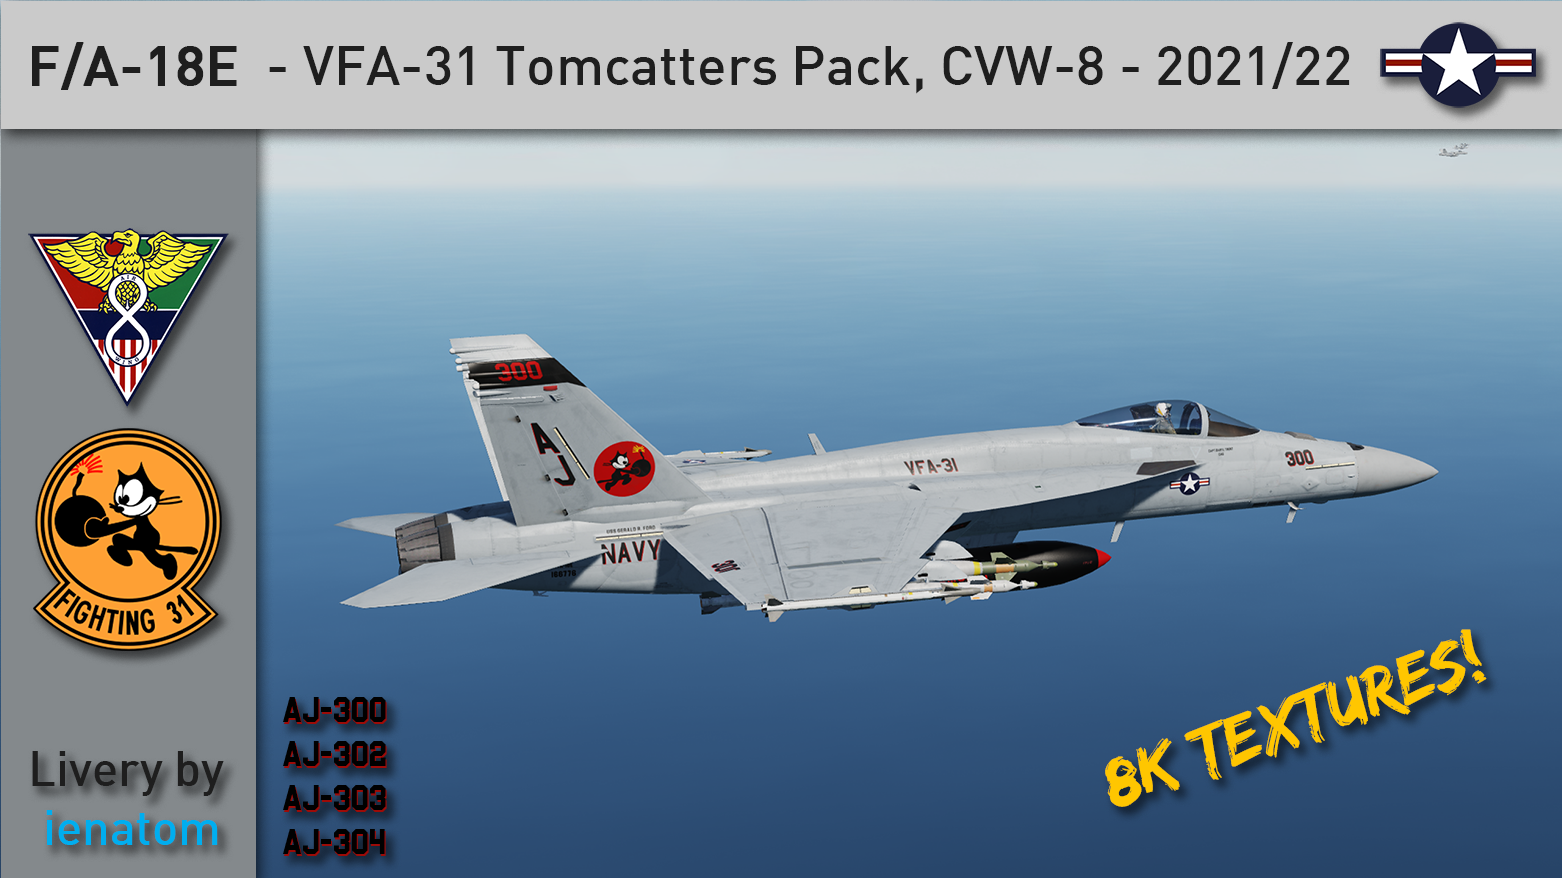 [F/A-18E] Tomcatters Pack - VFA-31, CVW-8, US Navy - 2021/2022 [Updated 20/11/2023]